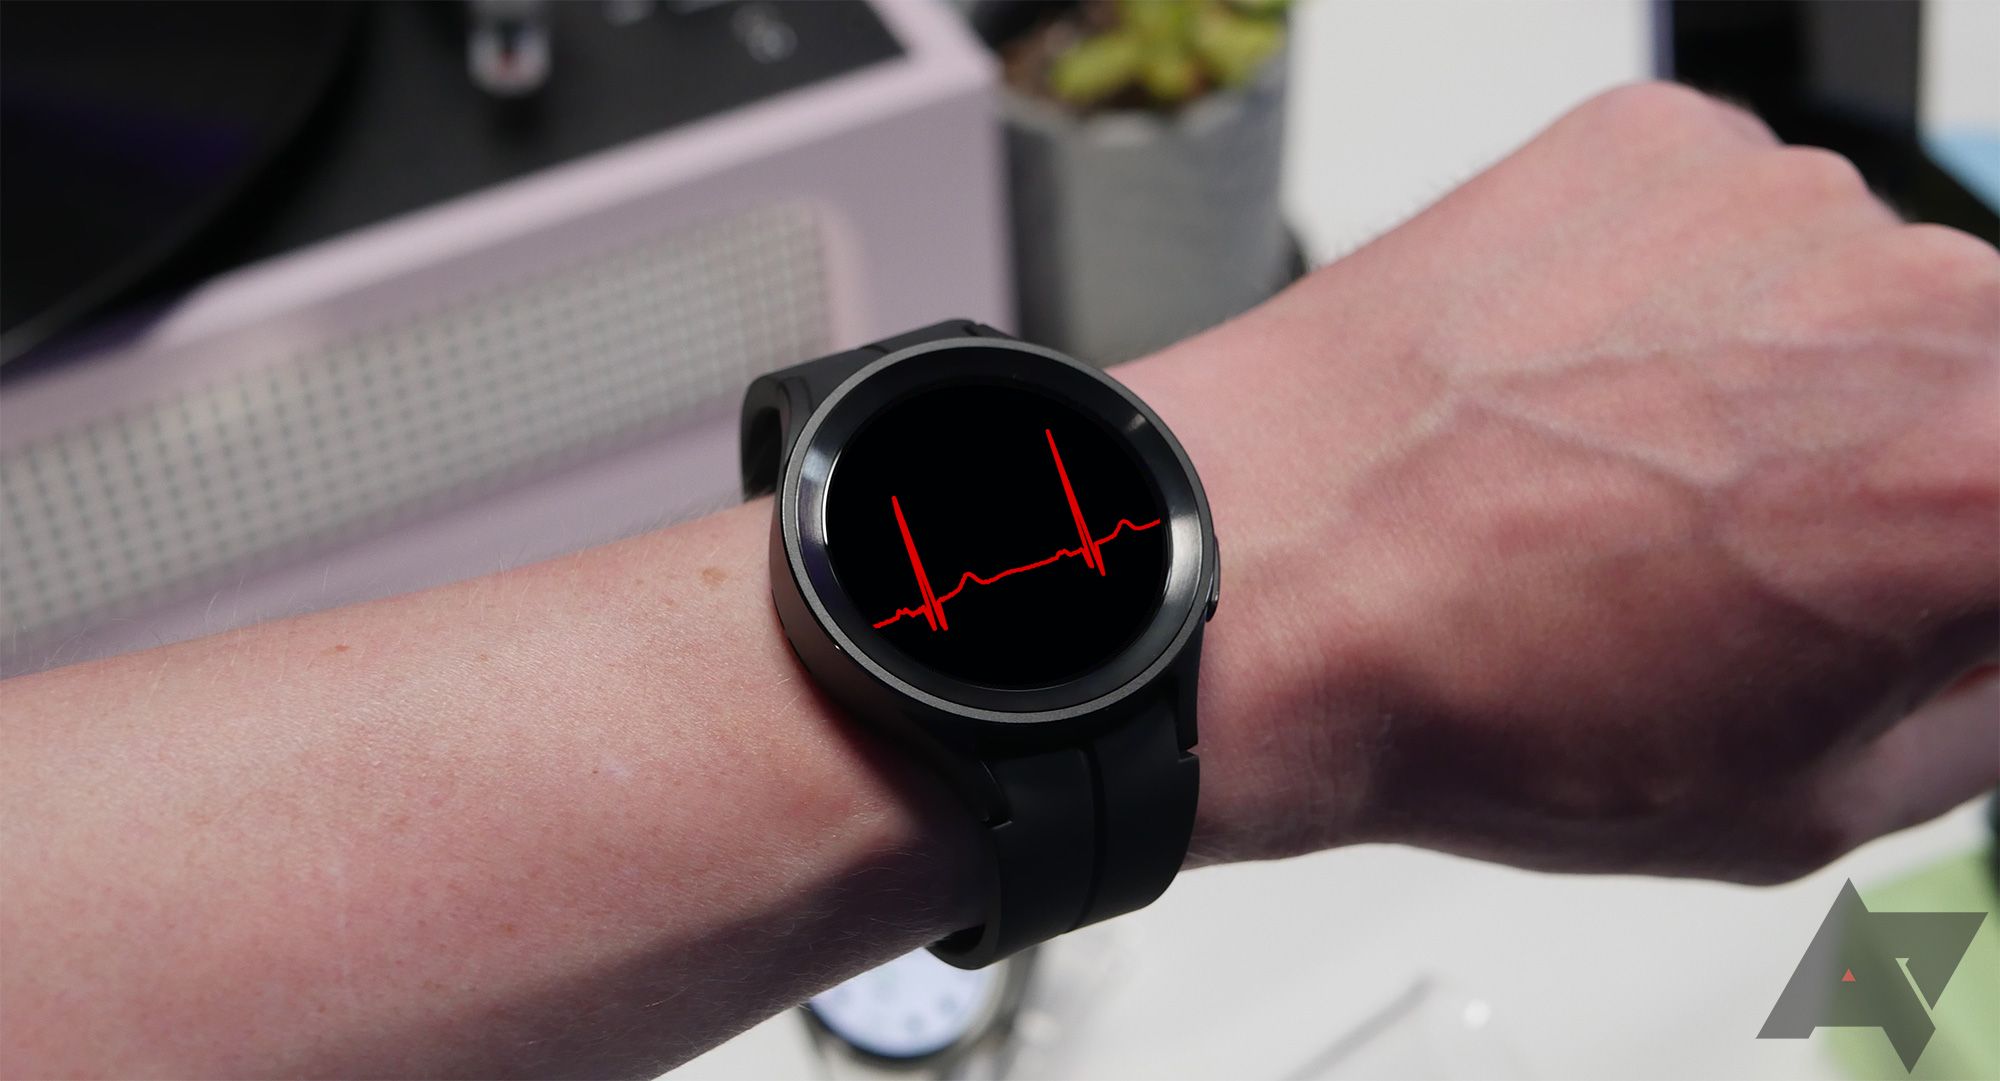 Samsung Galaxy Watch 5 Pro with ECG photoshopped in